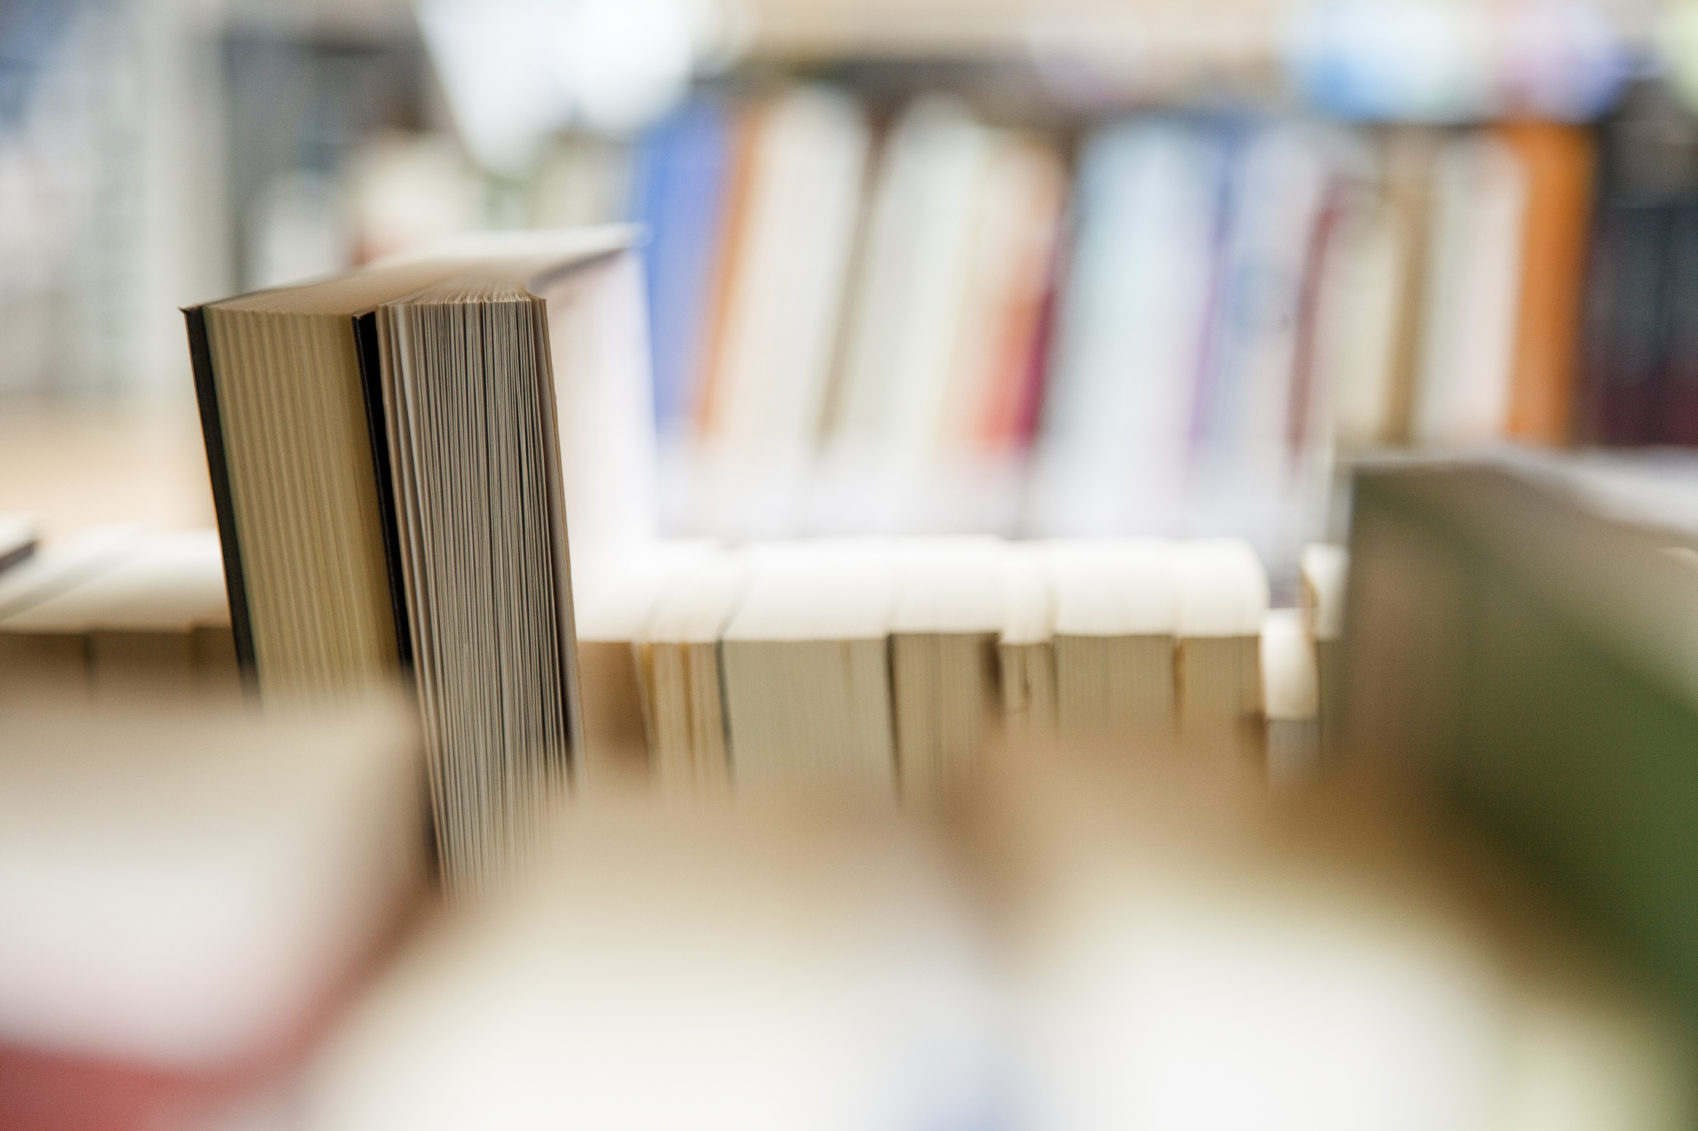 close-up image showing the leaf-sides of two oversized books side-by-side on a bookshelf, with additional books in soft focus background